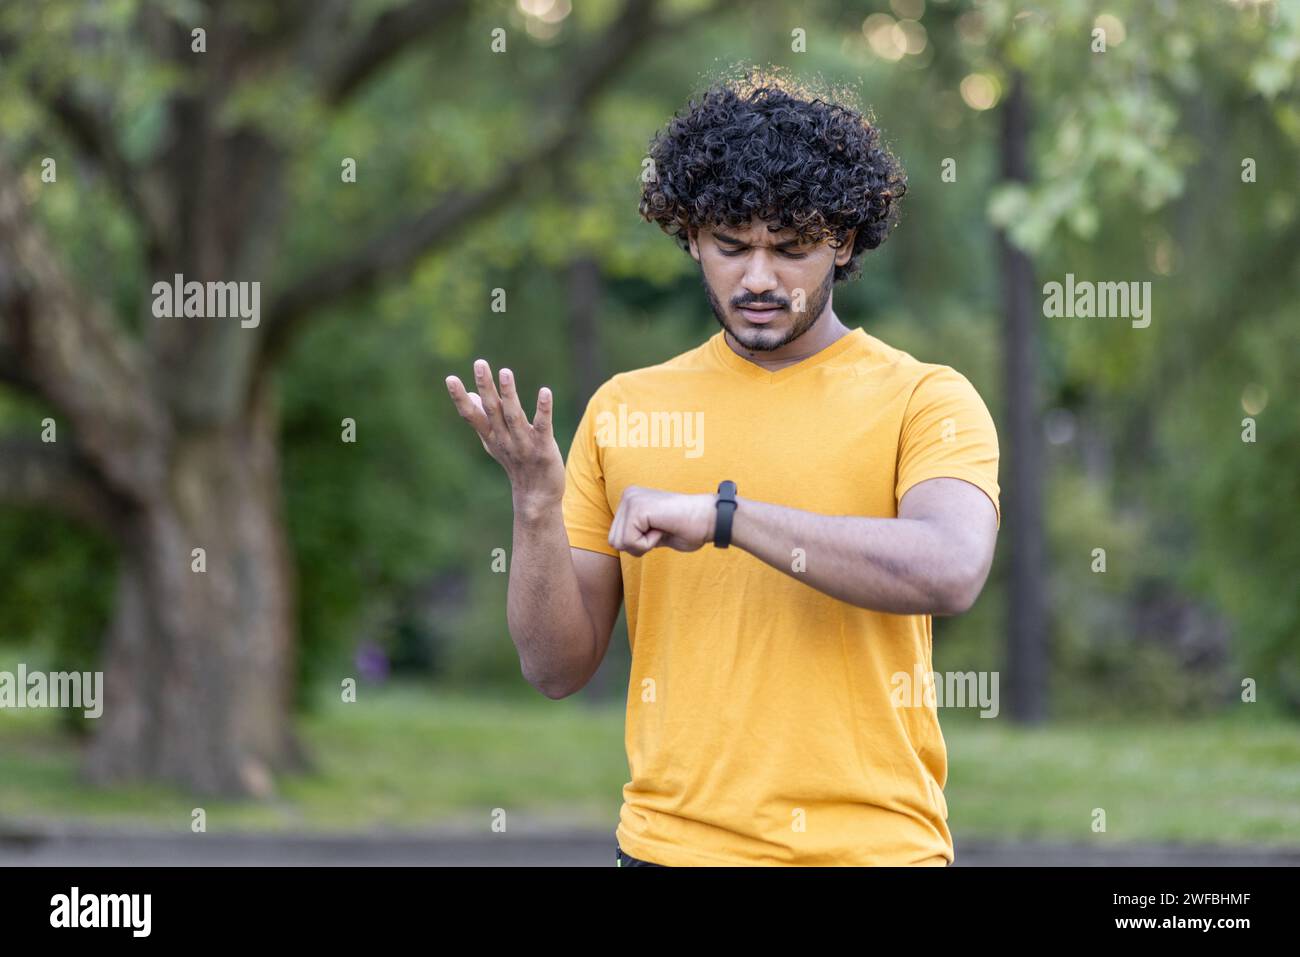 Focused young man with curly hair checking smartwatch during outdoor workout in park, wearing casual yellow t-shirt, blurred greenery. Stock Photo